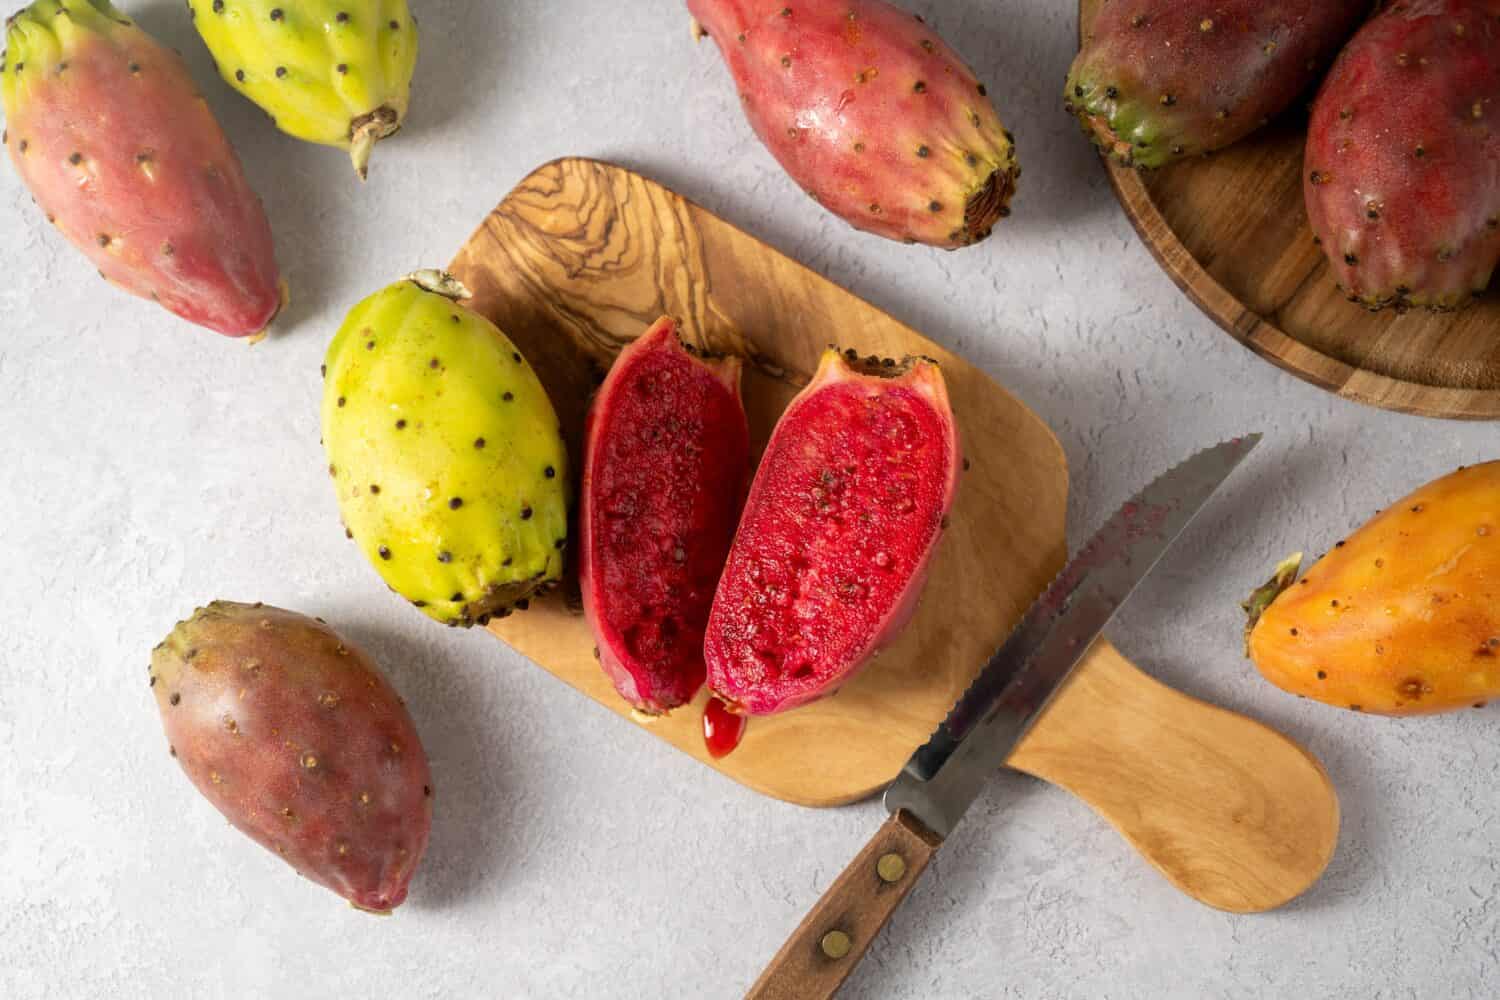 Prickly pears, exotic cactus fruits cut in halves, top view.